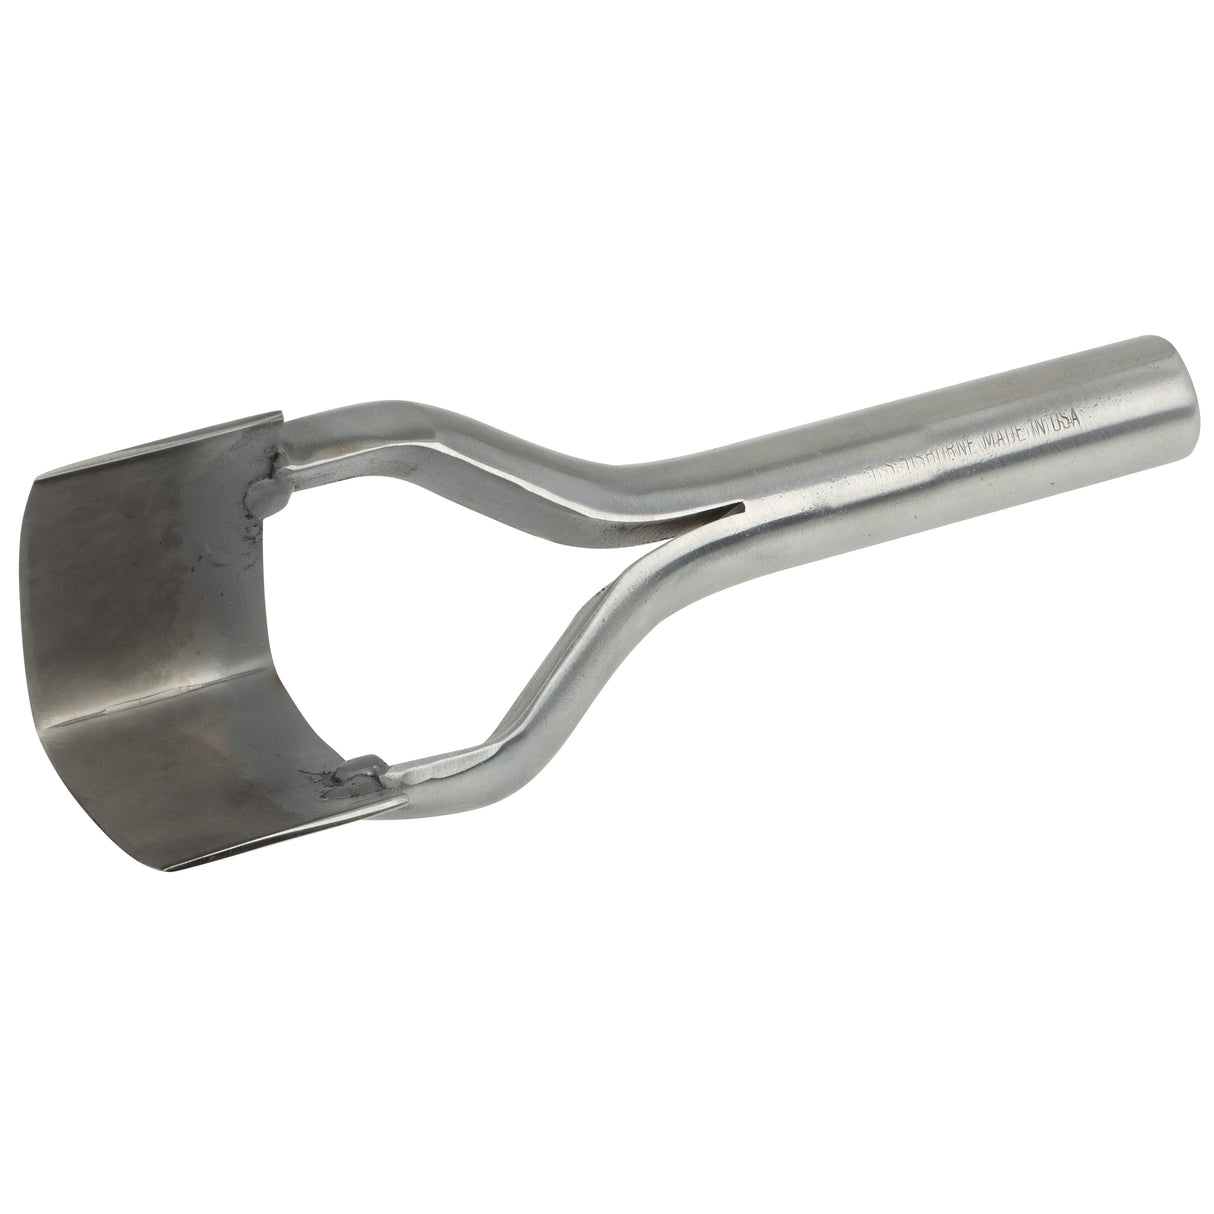 English Point Strap End Punch